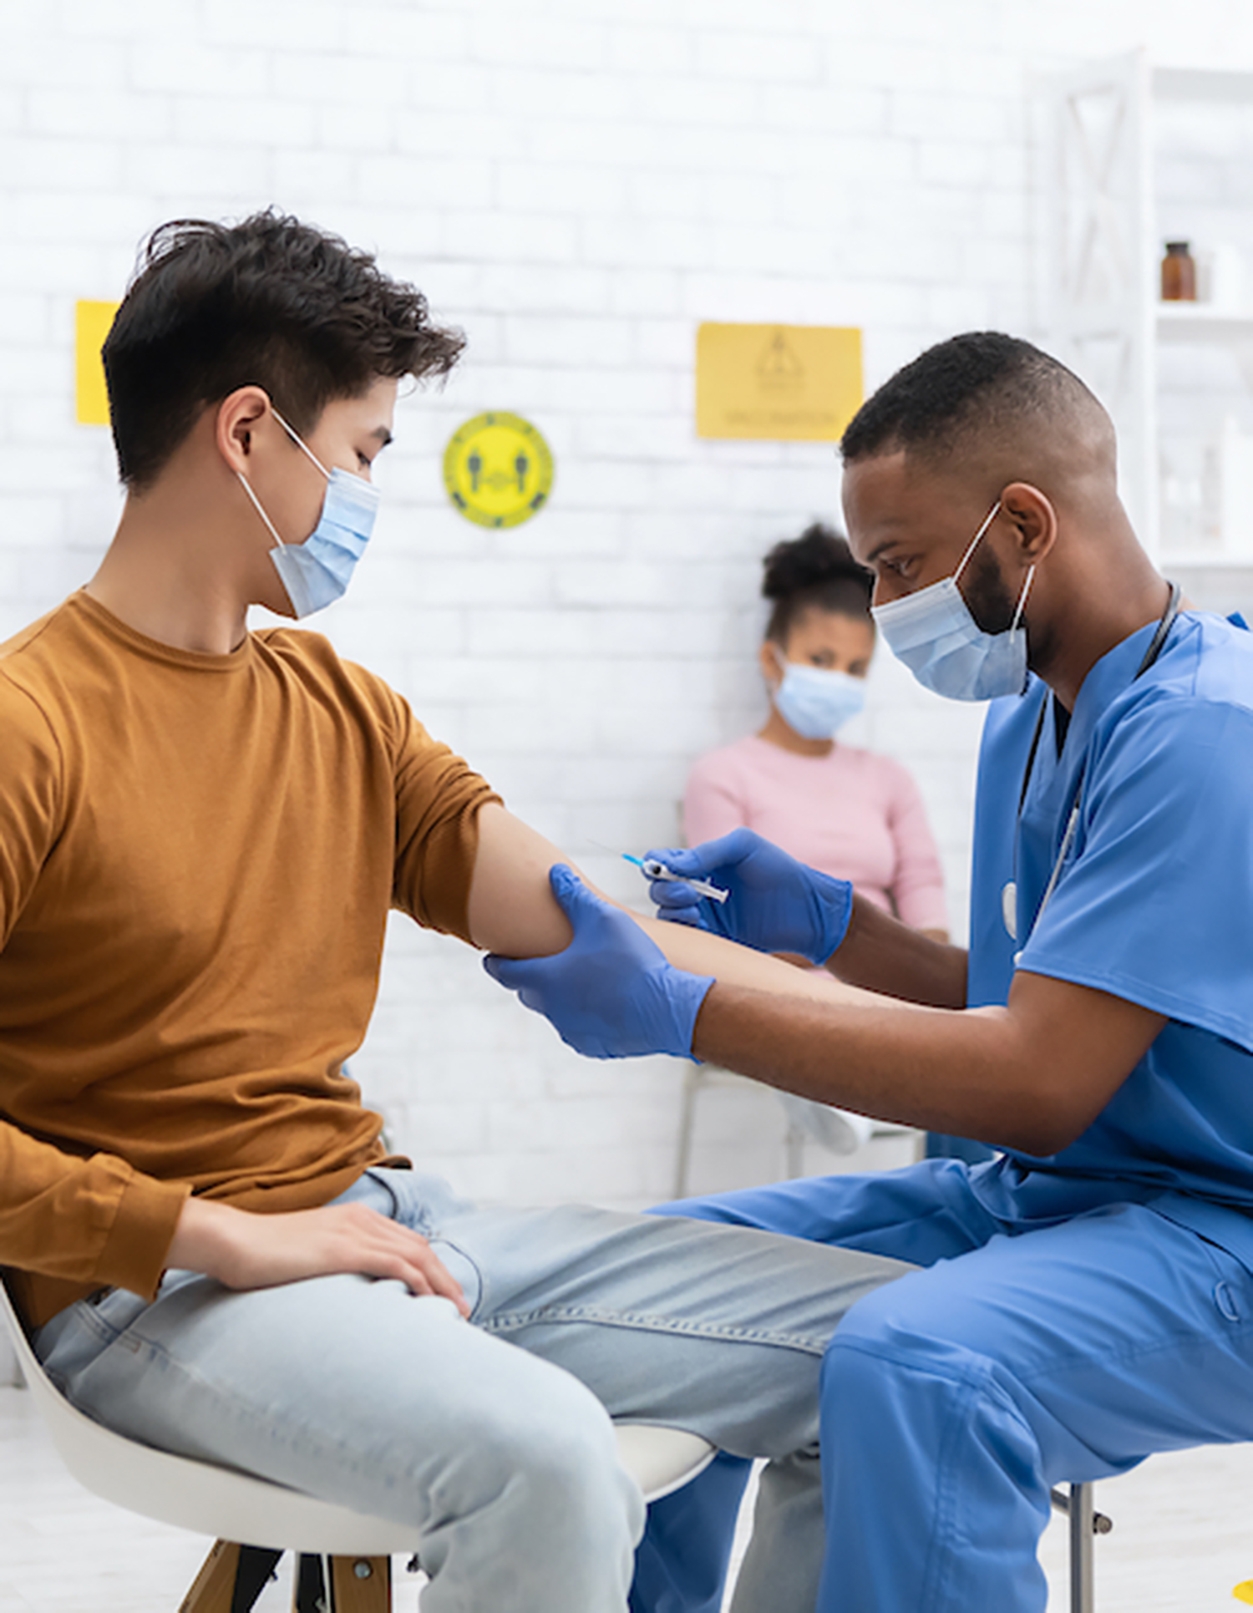 Image of a doctor speaking with a patient